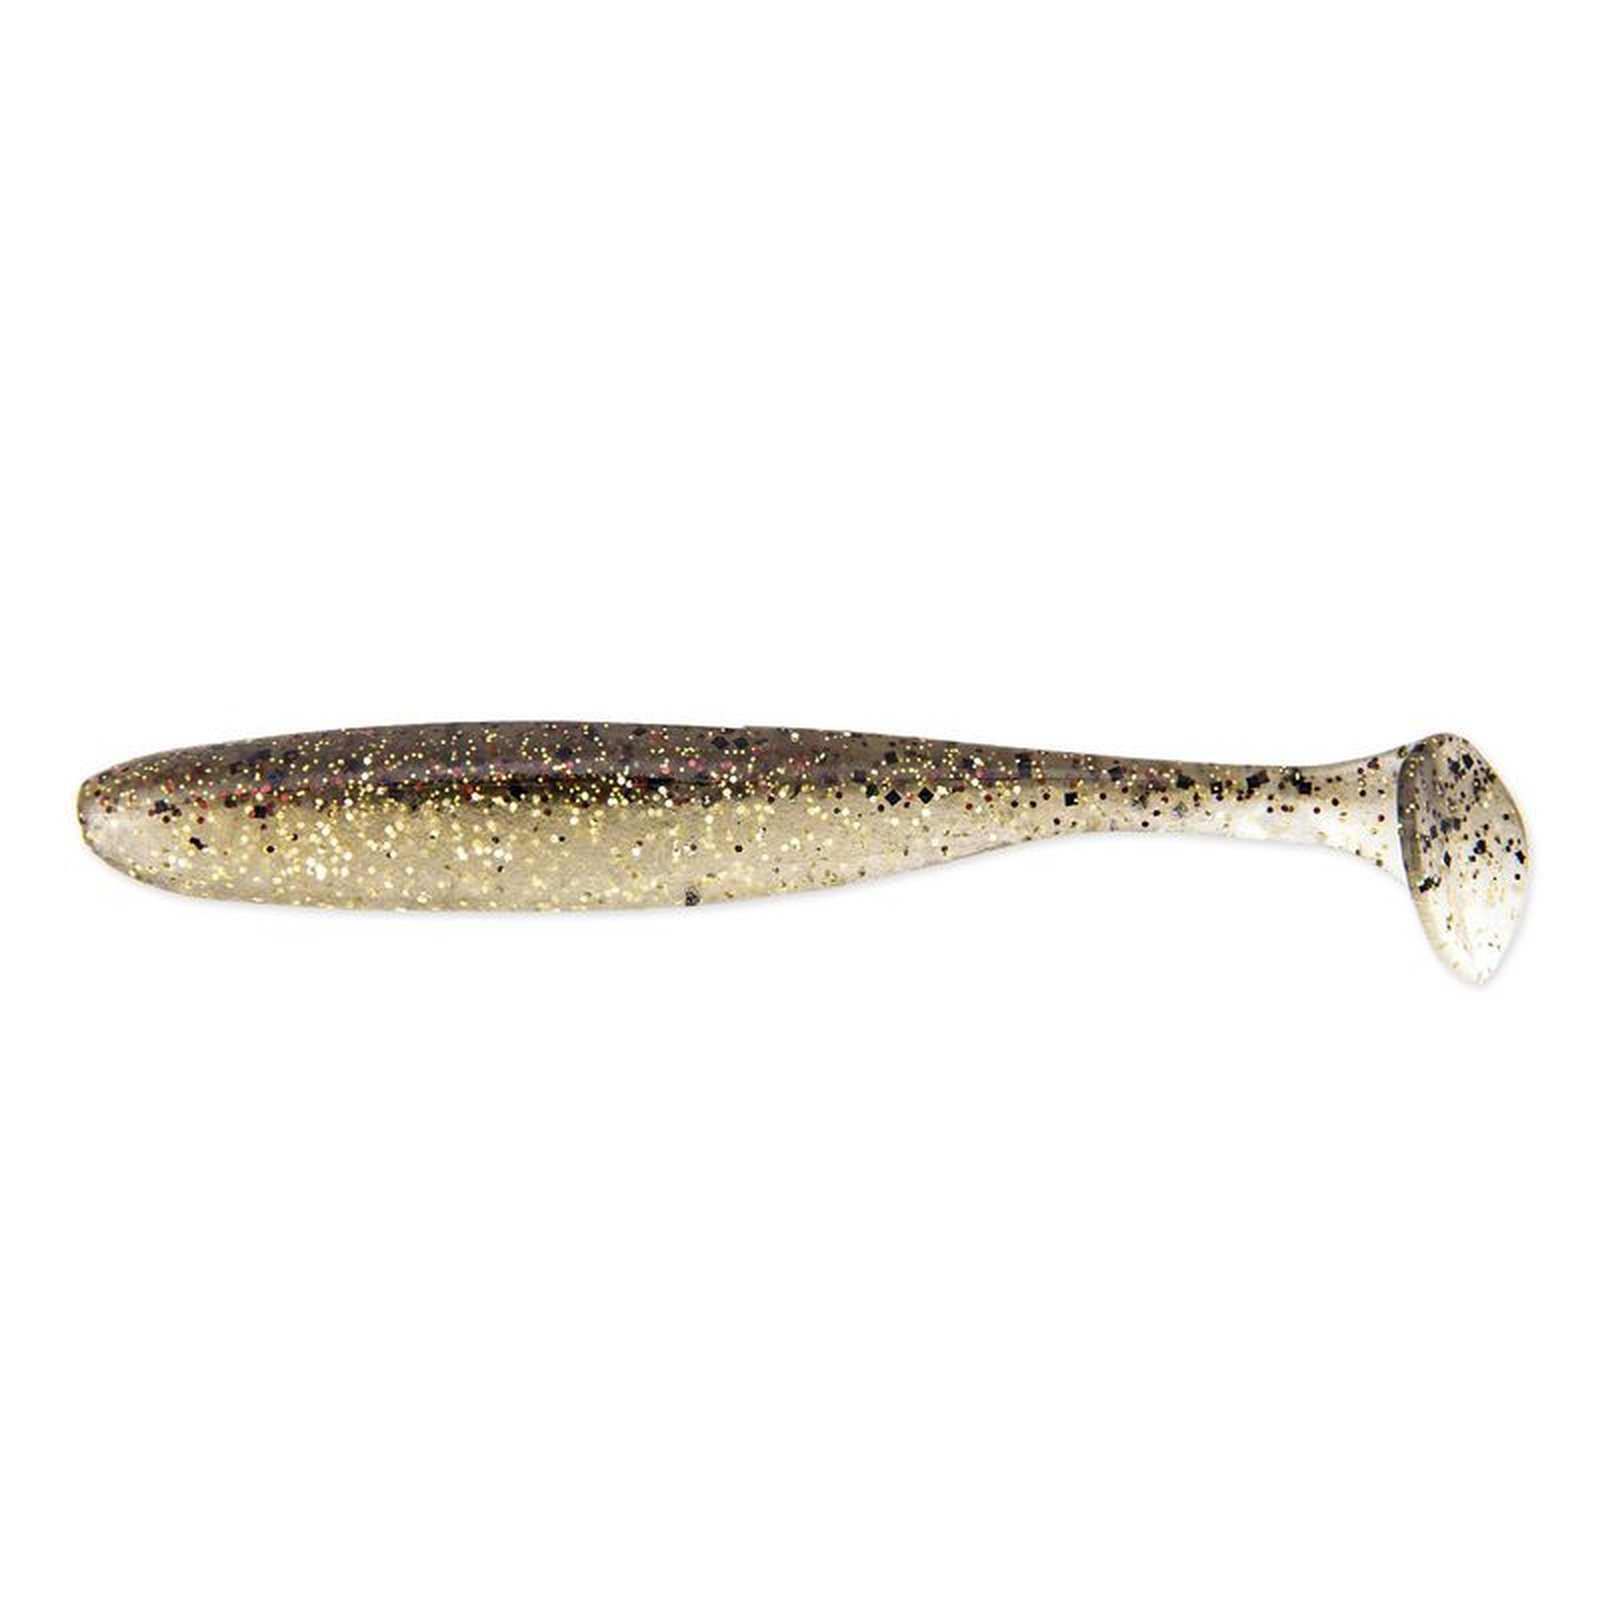 OUT/OUT_ARTICOLI/areapesca.it_AP01039.4581.4576_easy-shiner-65---16-cm---k417-gold-flash-minnow.jpg